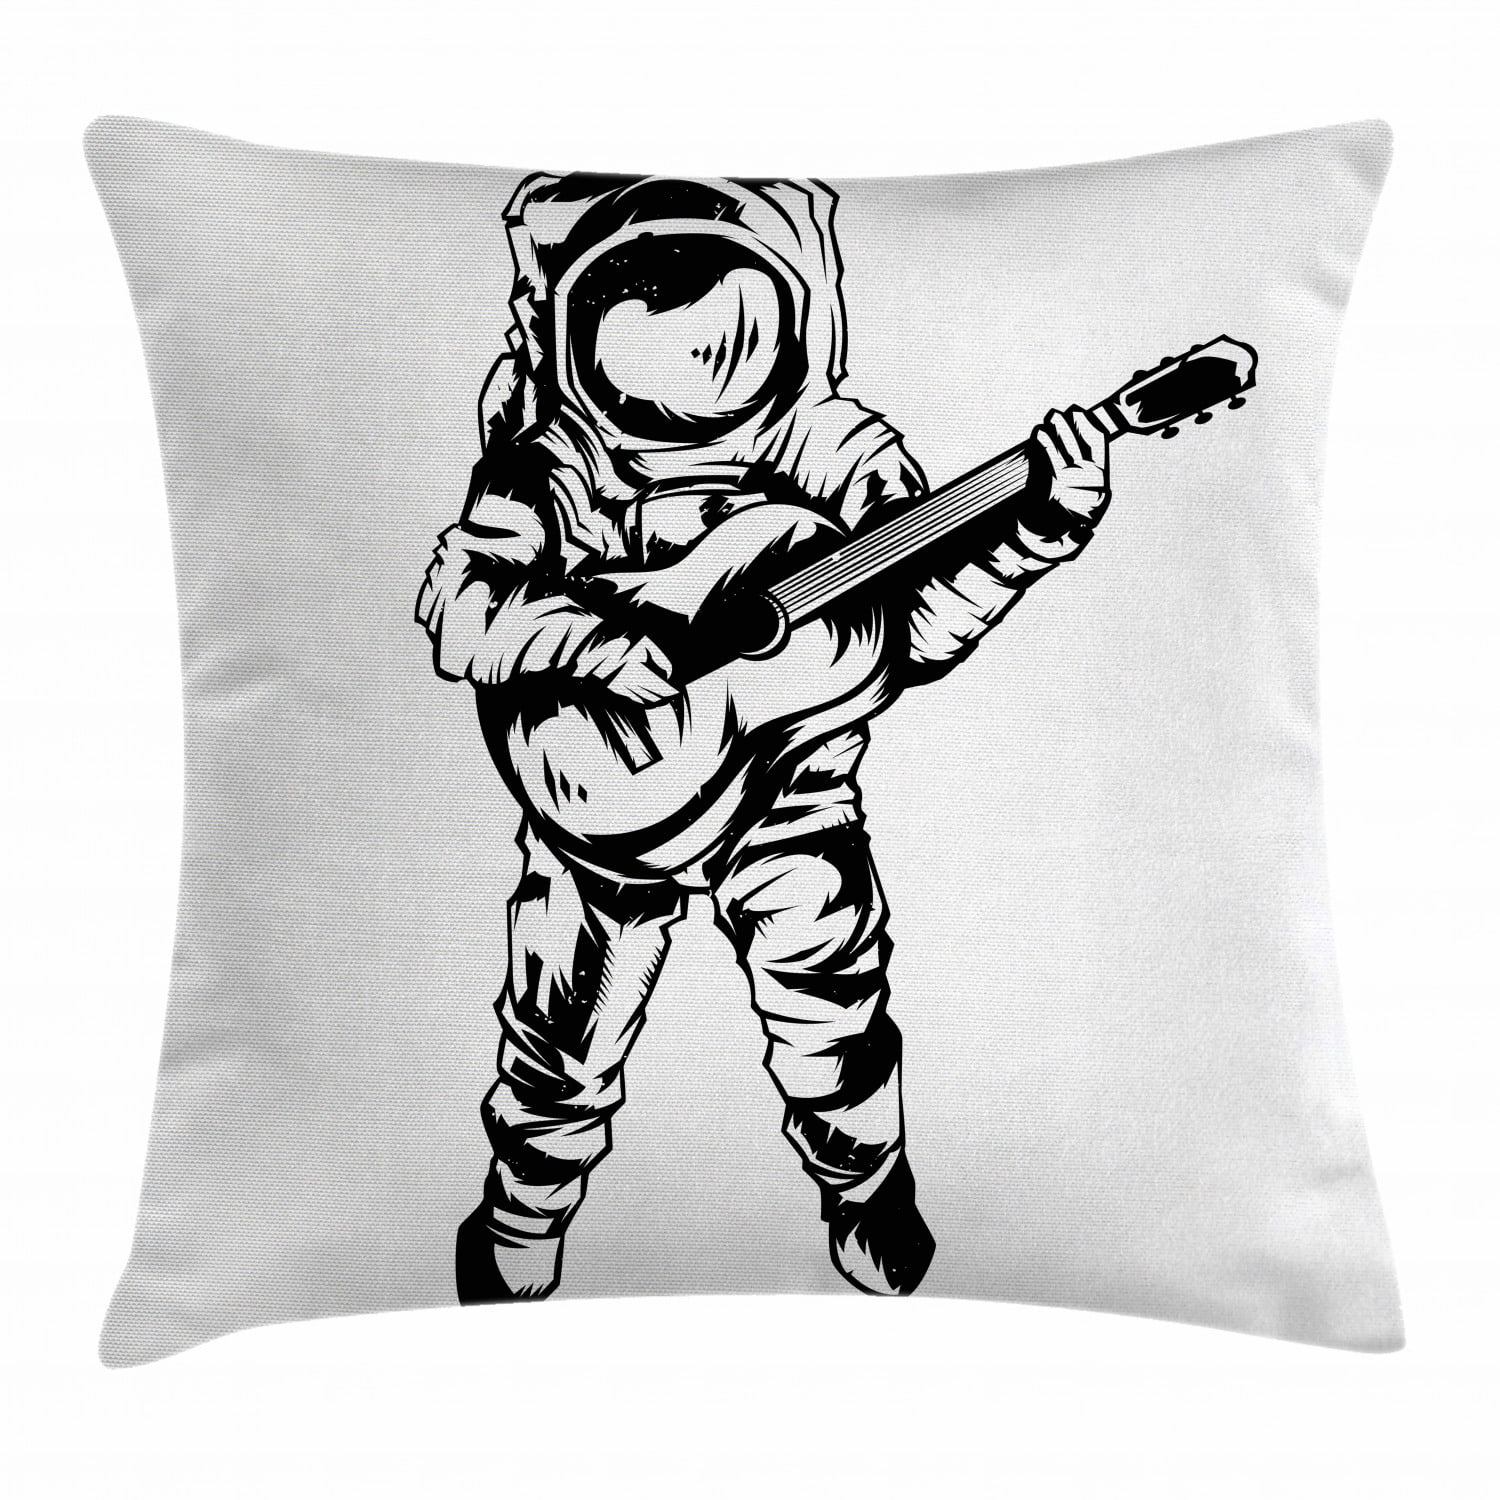 Astronaut Pillow Cover Art Printed Cushion Covers Decorative Trow Pillow Covers